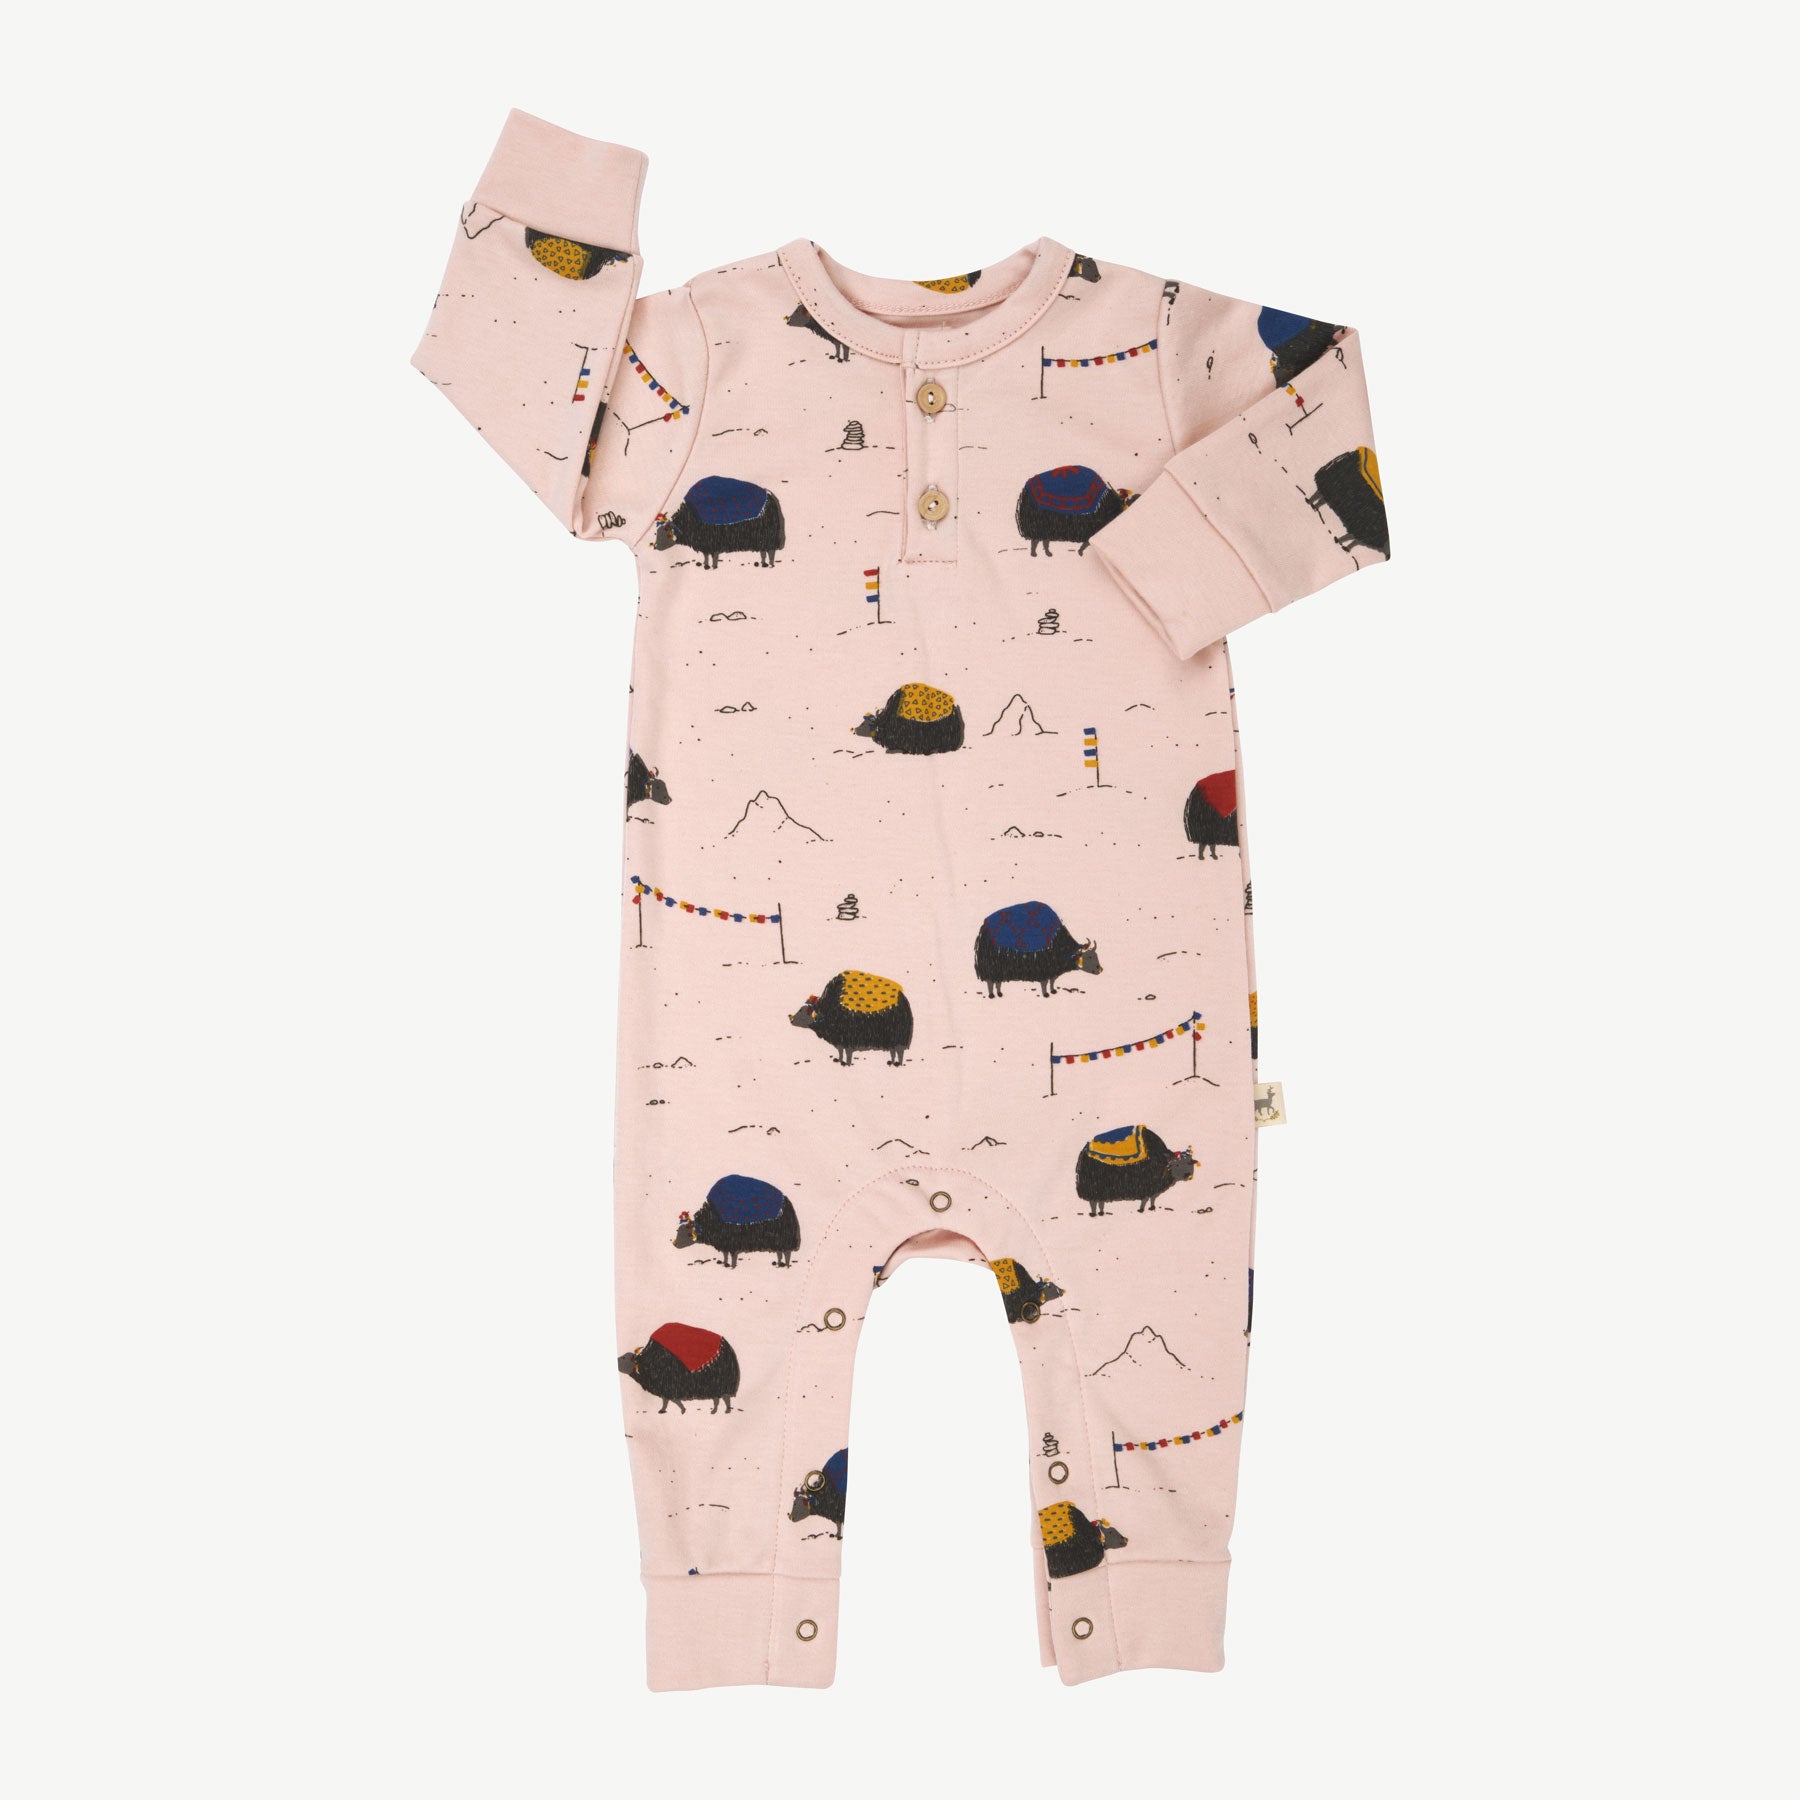 'yak's journey' peach whip buttons jumpsuit